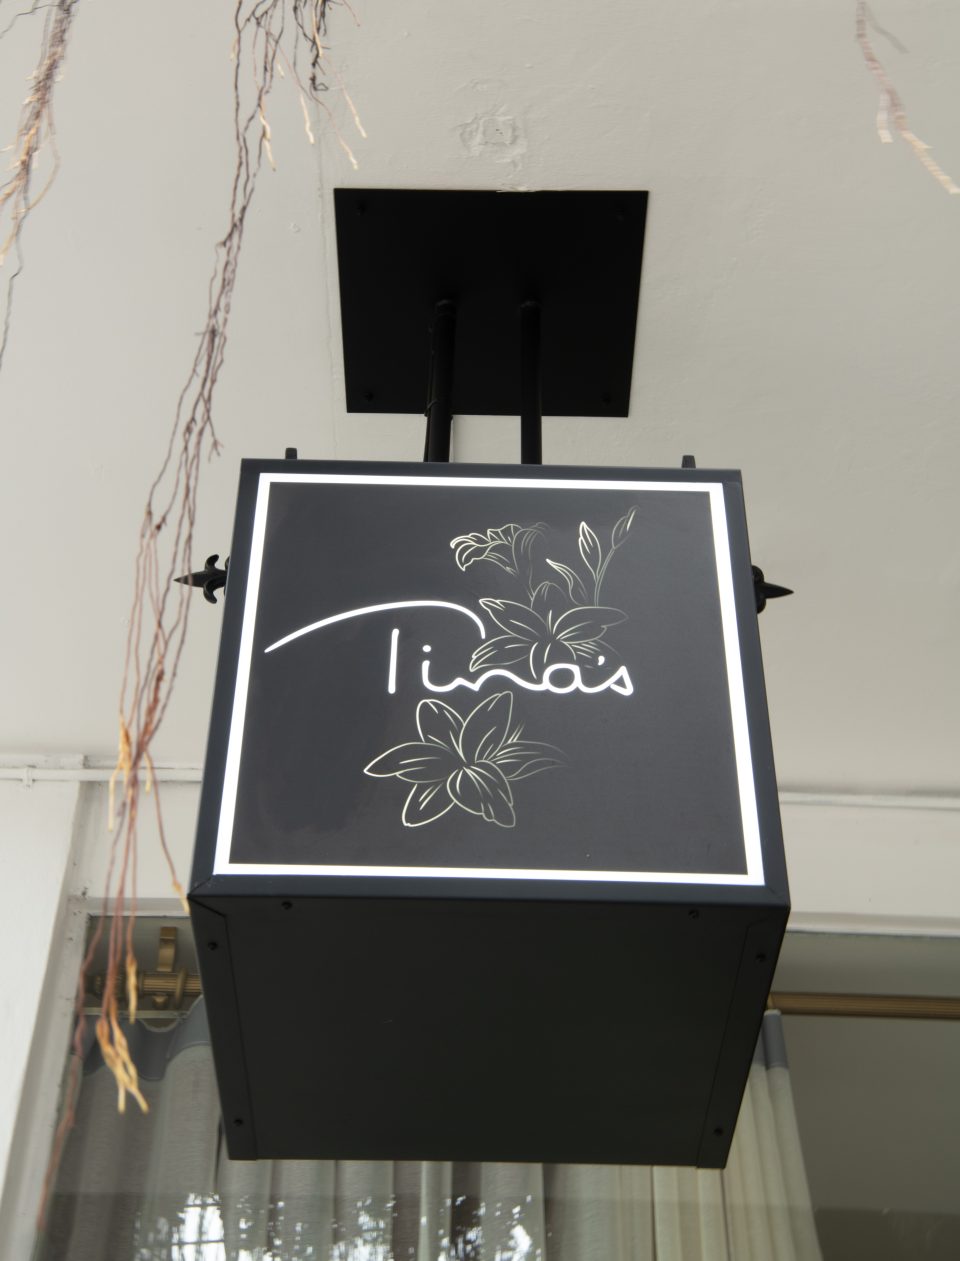 Tina’s: Thailand’s First New Orleans Fine-Dining Restaurant To Enrich Bangkok’s Bustling Culinary Scene